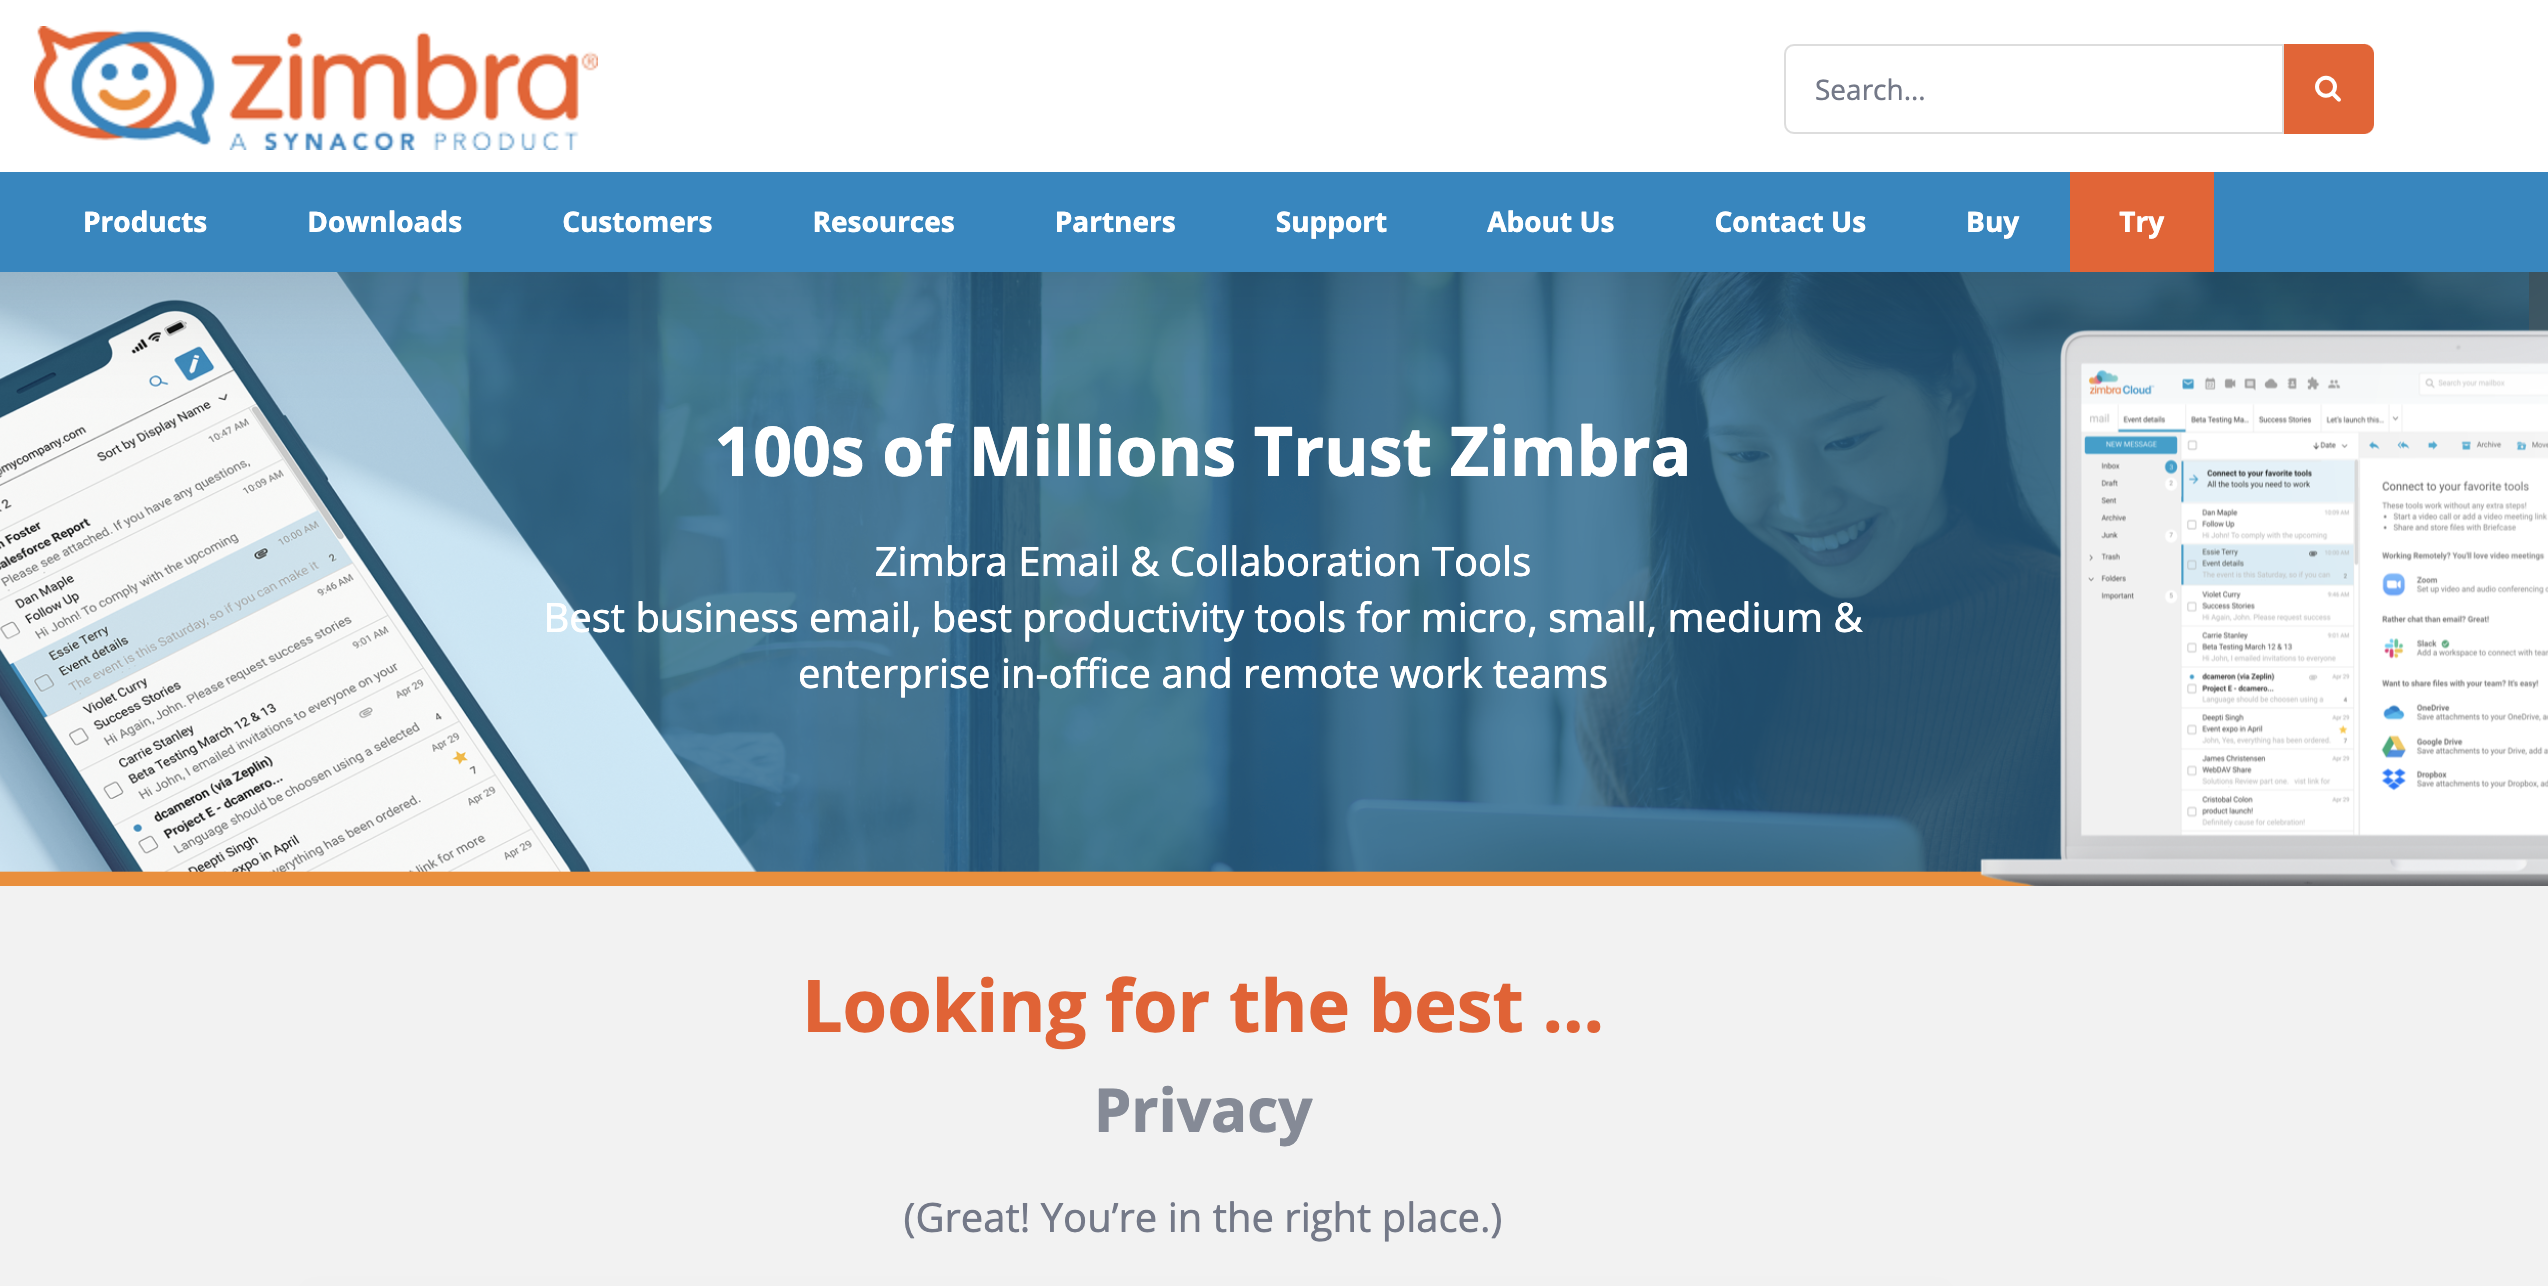 Did You Know? Getting Started with Zimbra Desktop - Zimbra : Blog